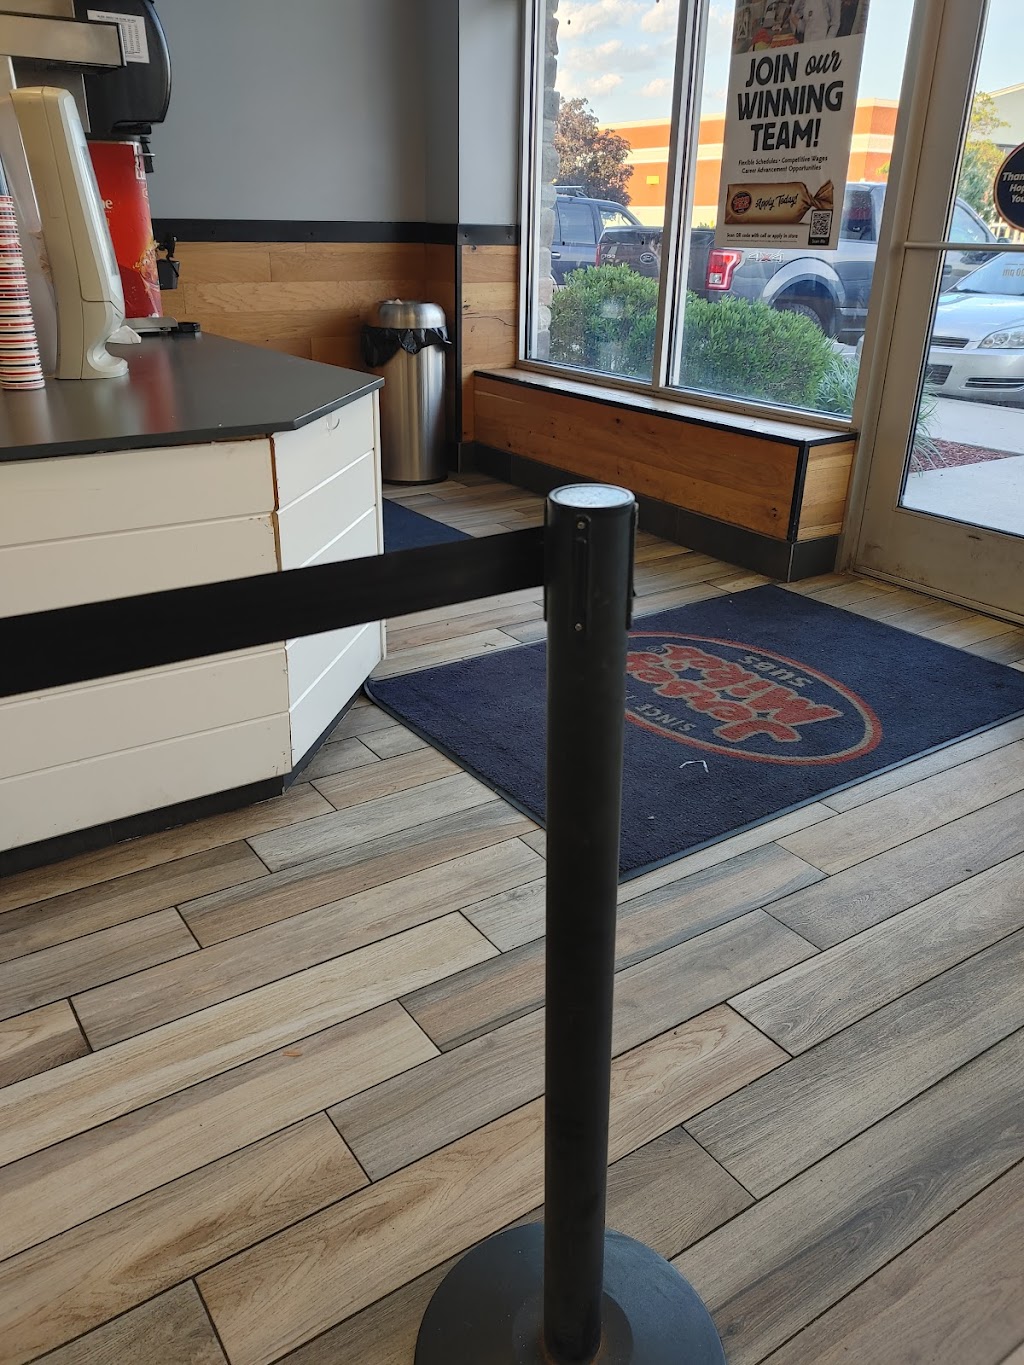 Jersey Mikes Subs | 1211 N Dupont Hwy, Dover, DE 19901 | Phone: (302) 672-7100